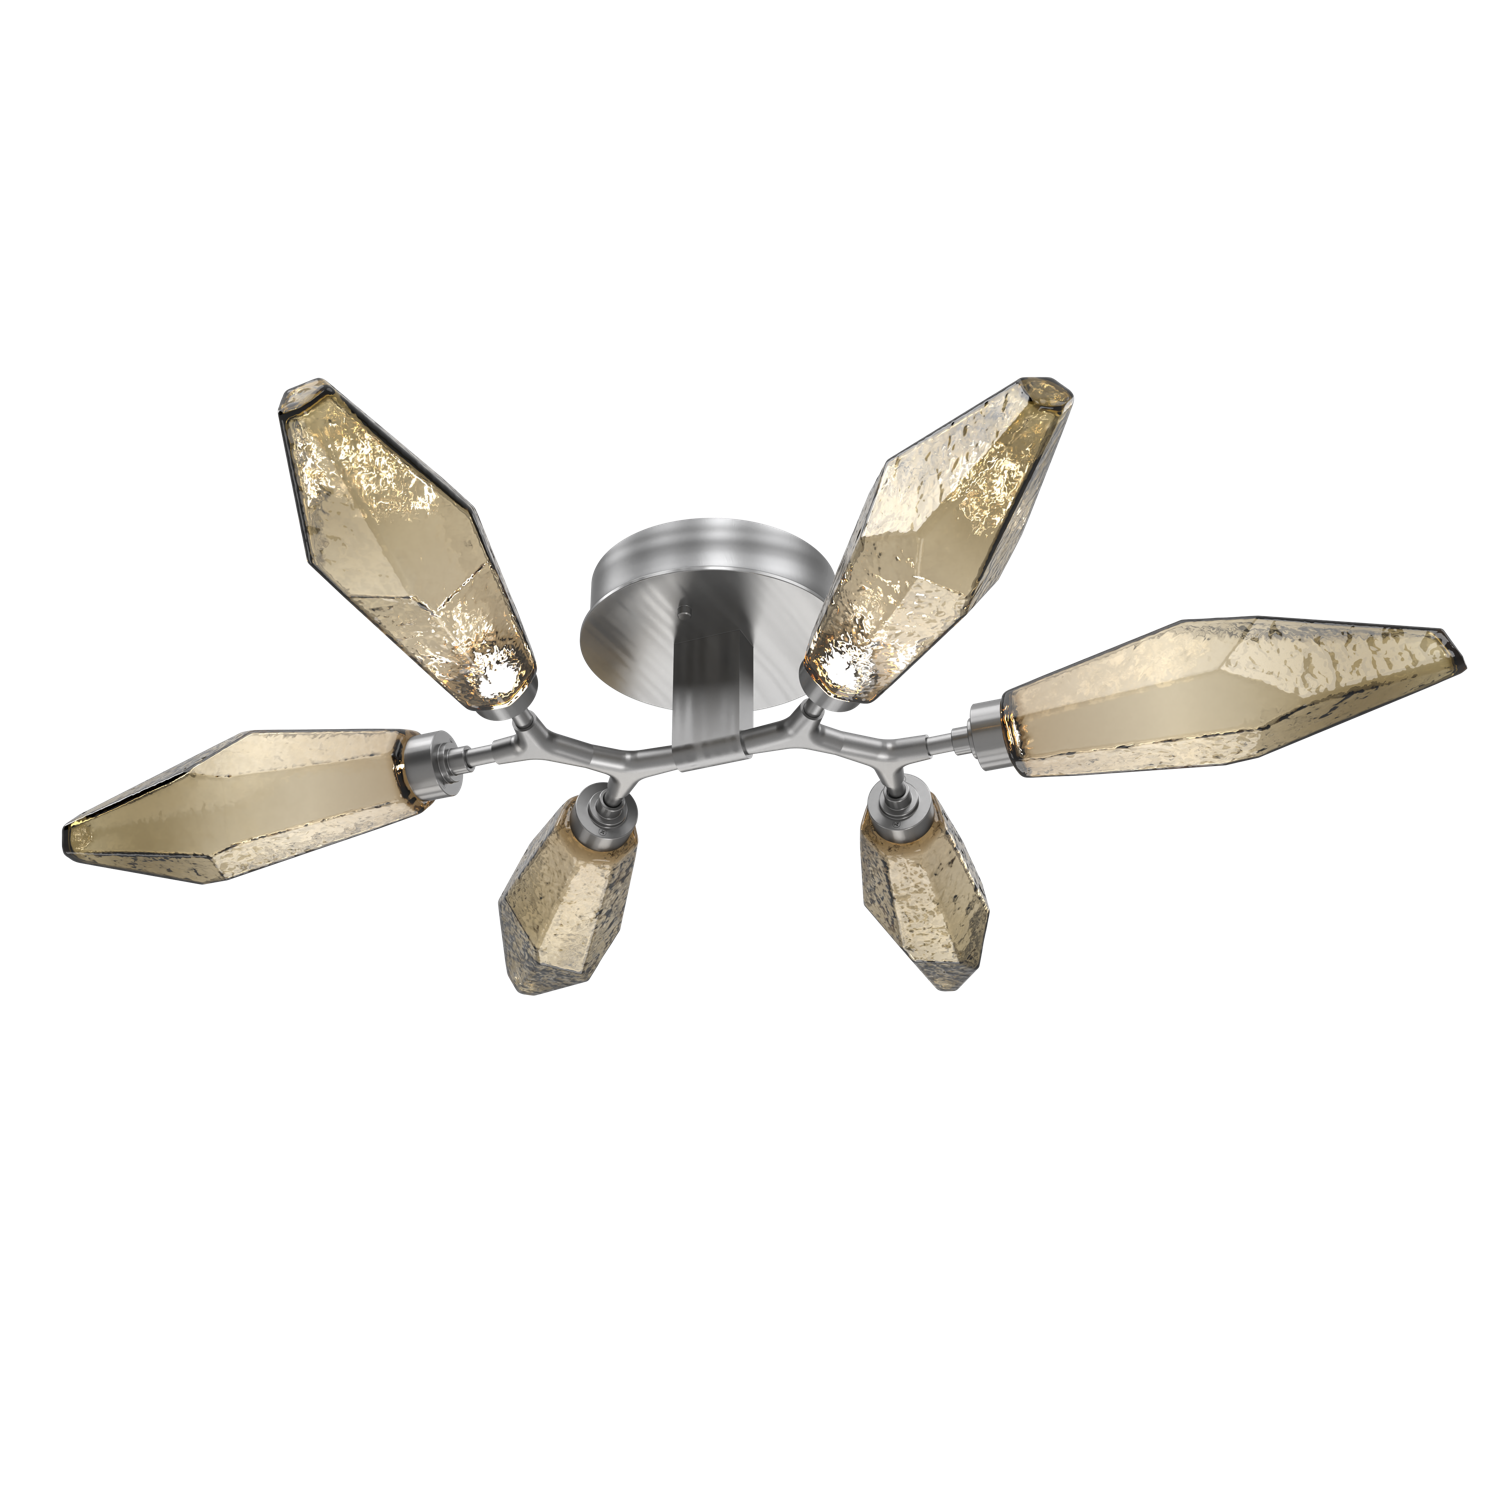 CLB0050-01-SN-CB-Hammerton-Studio-Rock-Crystal-flush-mount-light-with-satin-nickel-finish-and-chilled-bronze-blown-glass-shades-and-LED-lamping